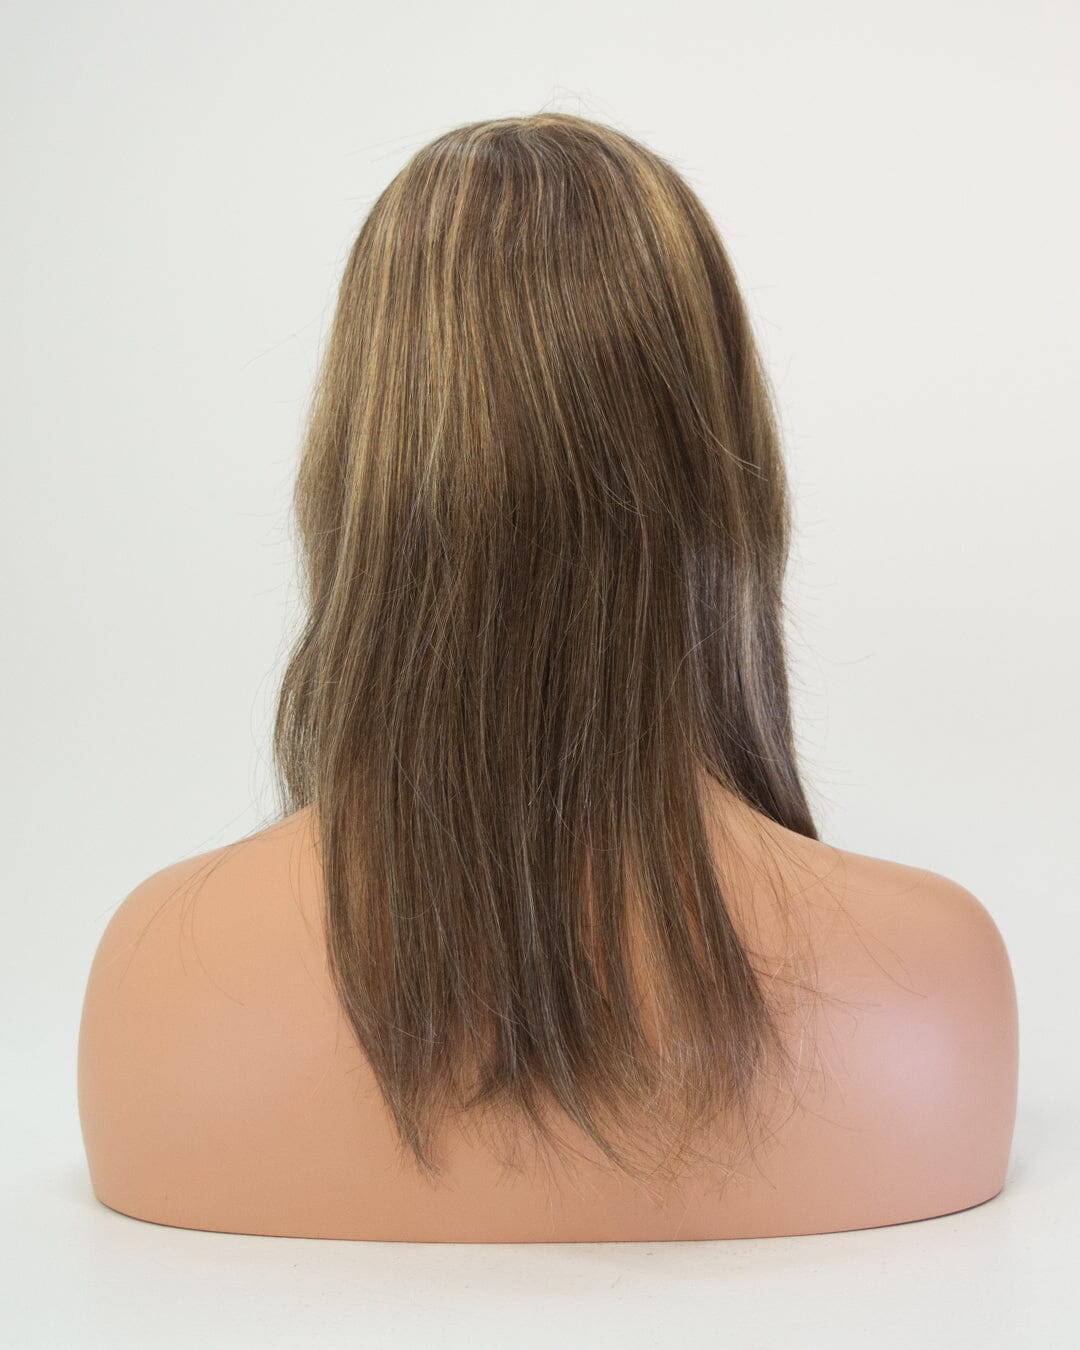 Dirty Blond/Brown 45cm Synthetic Hair Wig